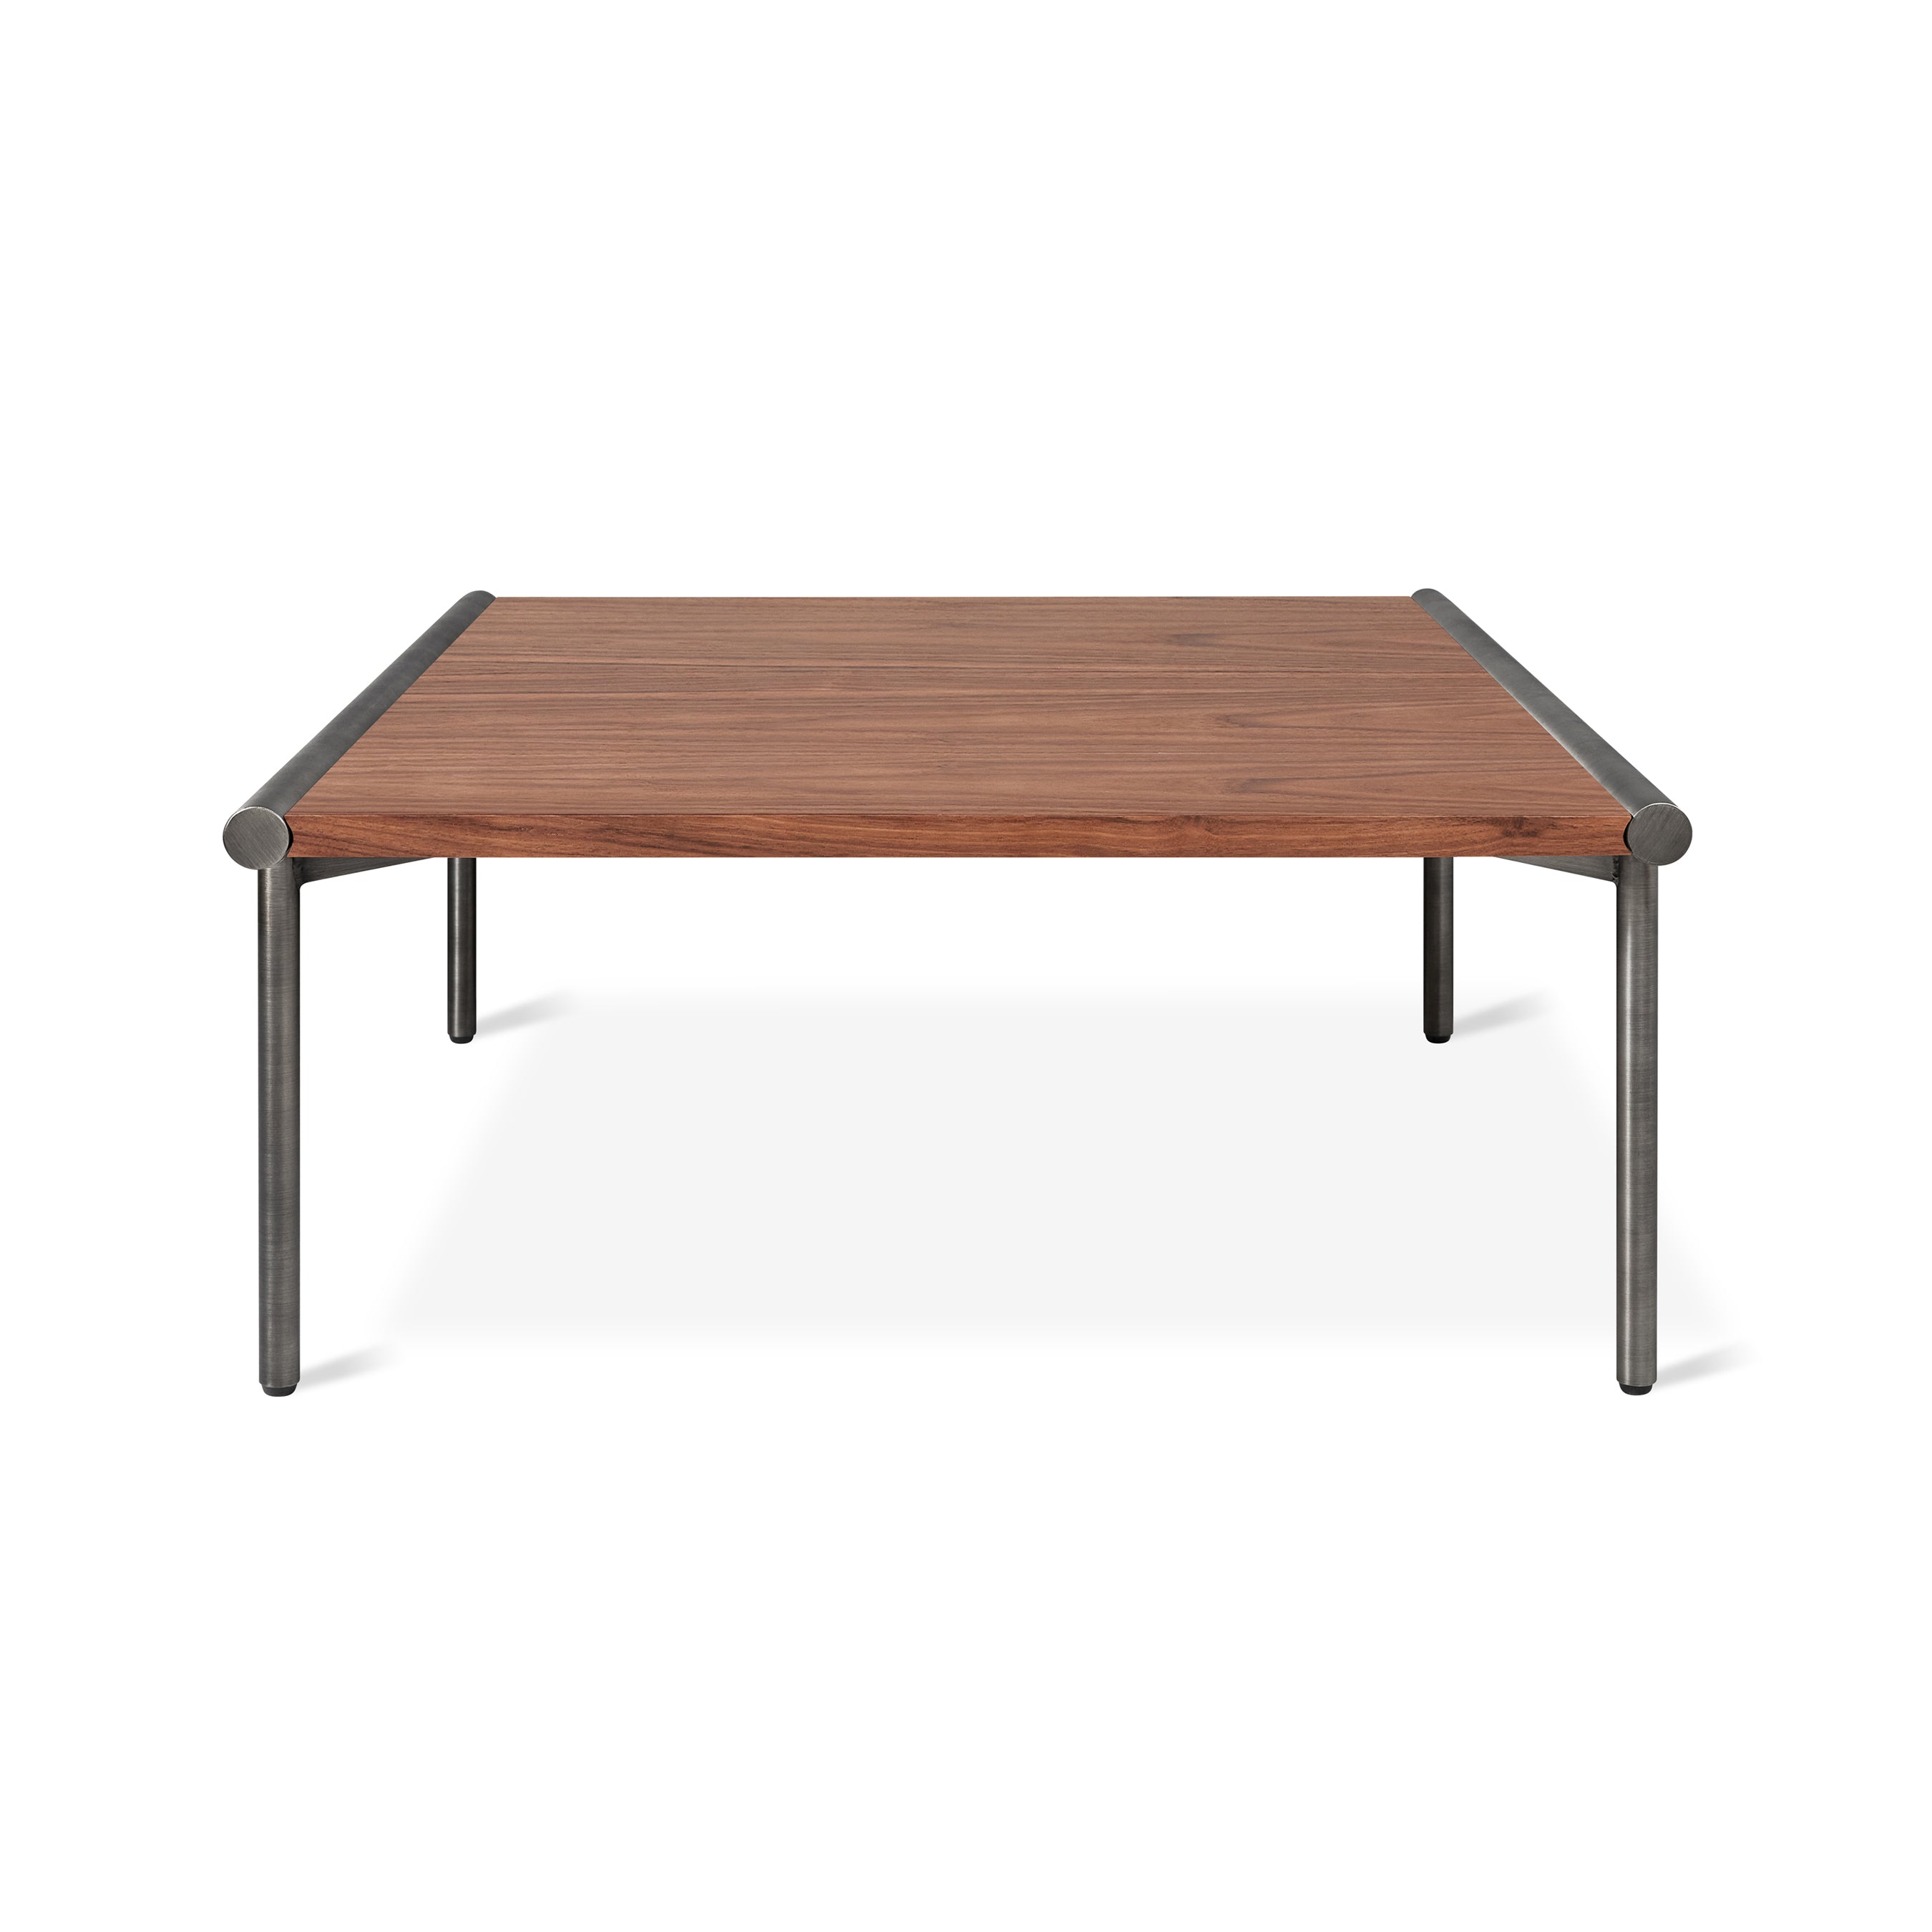 Manifold Coffee Table - Square